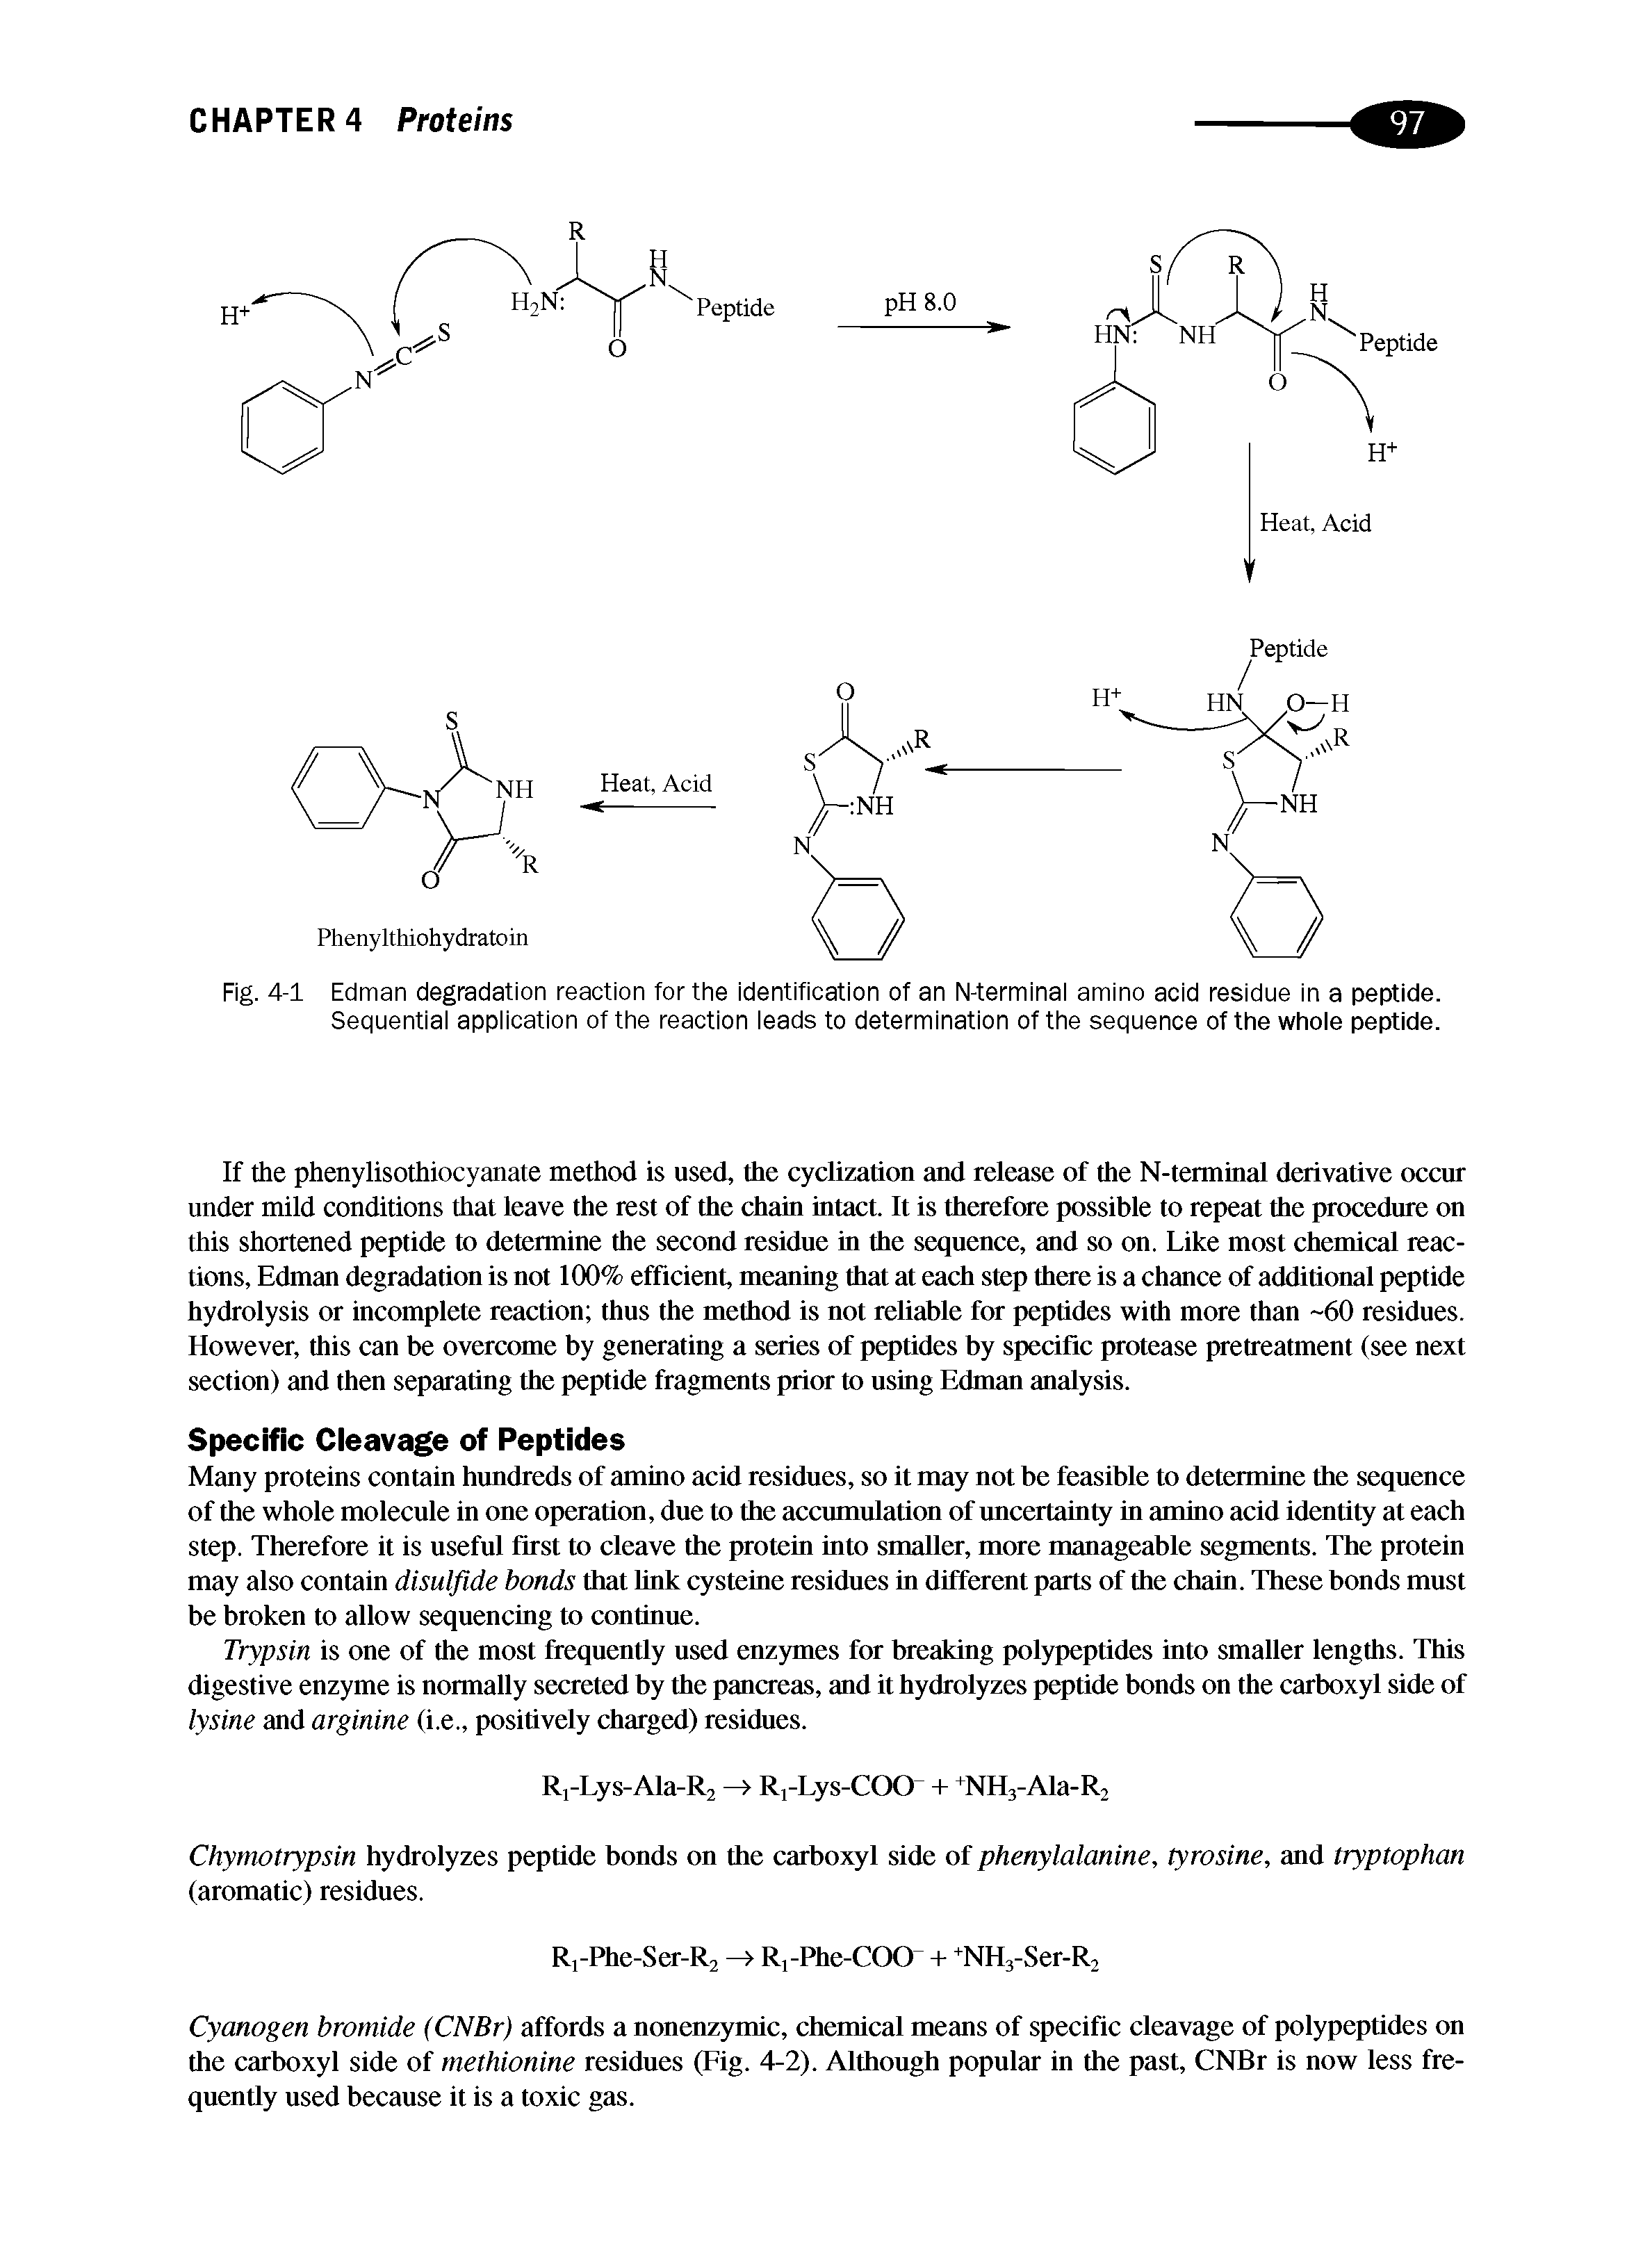 Fig. 4-1 Edman degradation reaction for the identification of an N-terminai amino acid residue in a peptide. Sequentiai appiication of the reaction ieads to determination of the sequence of the whole peptide.